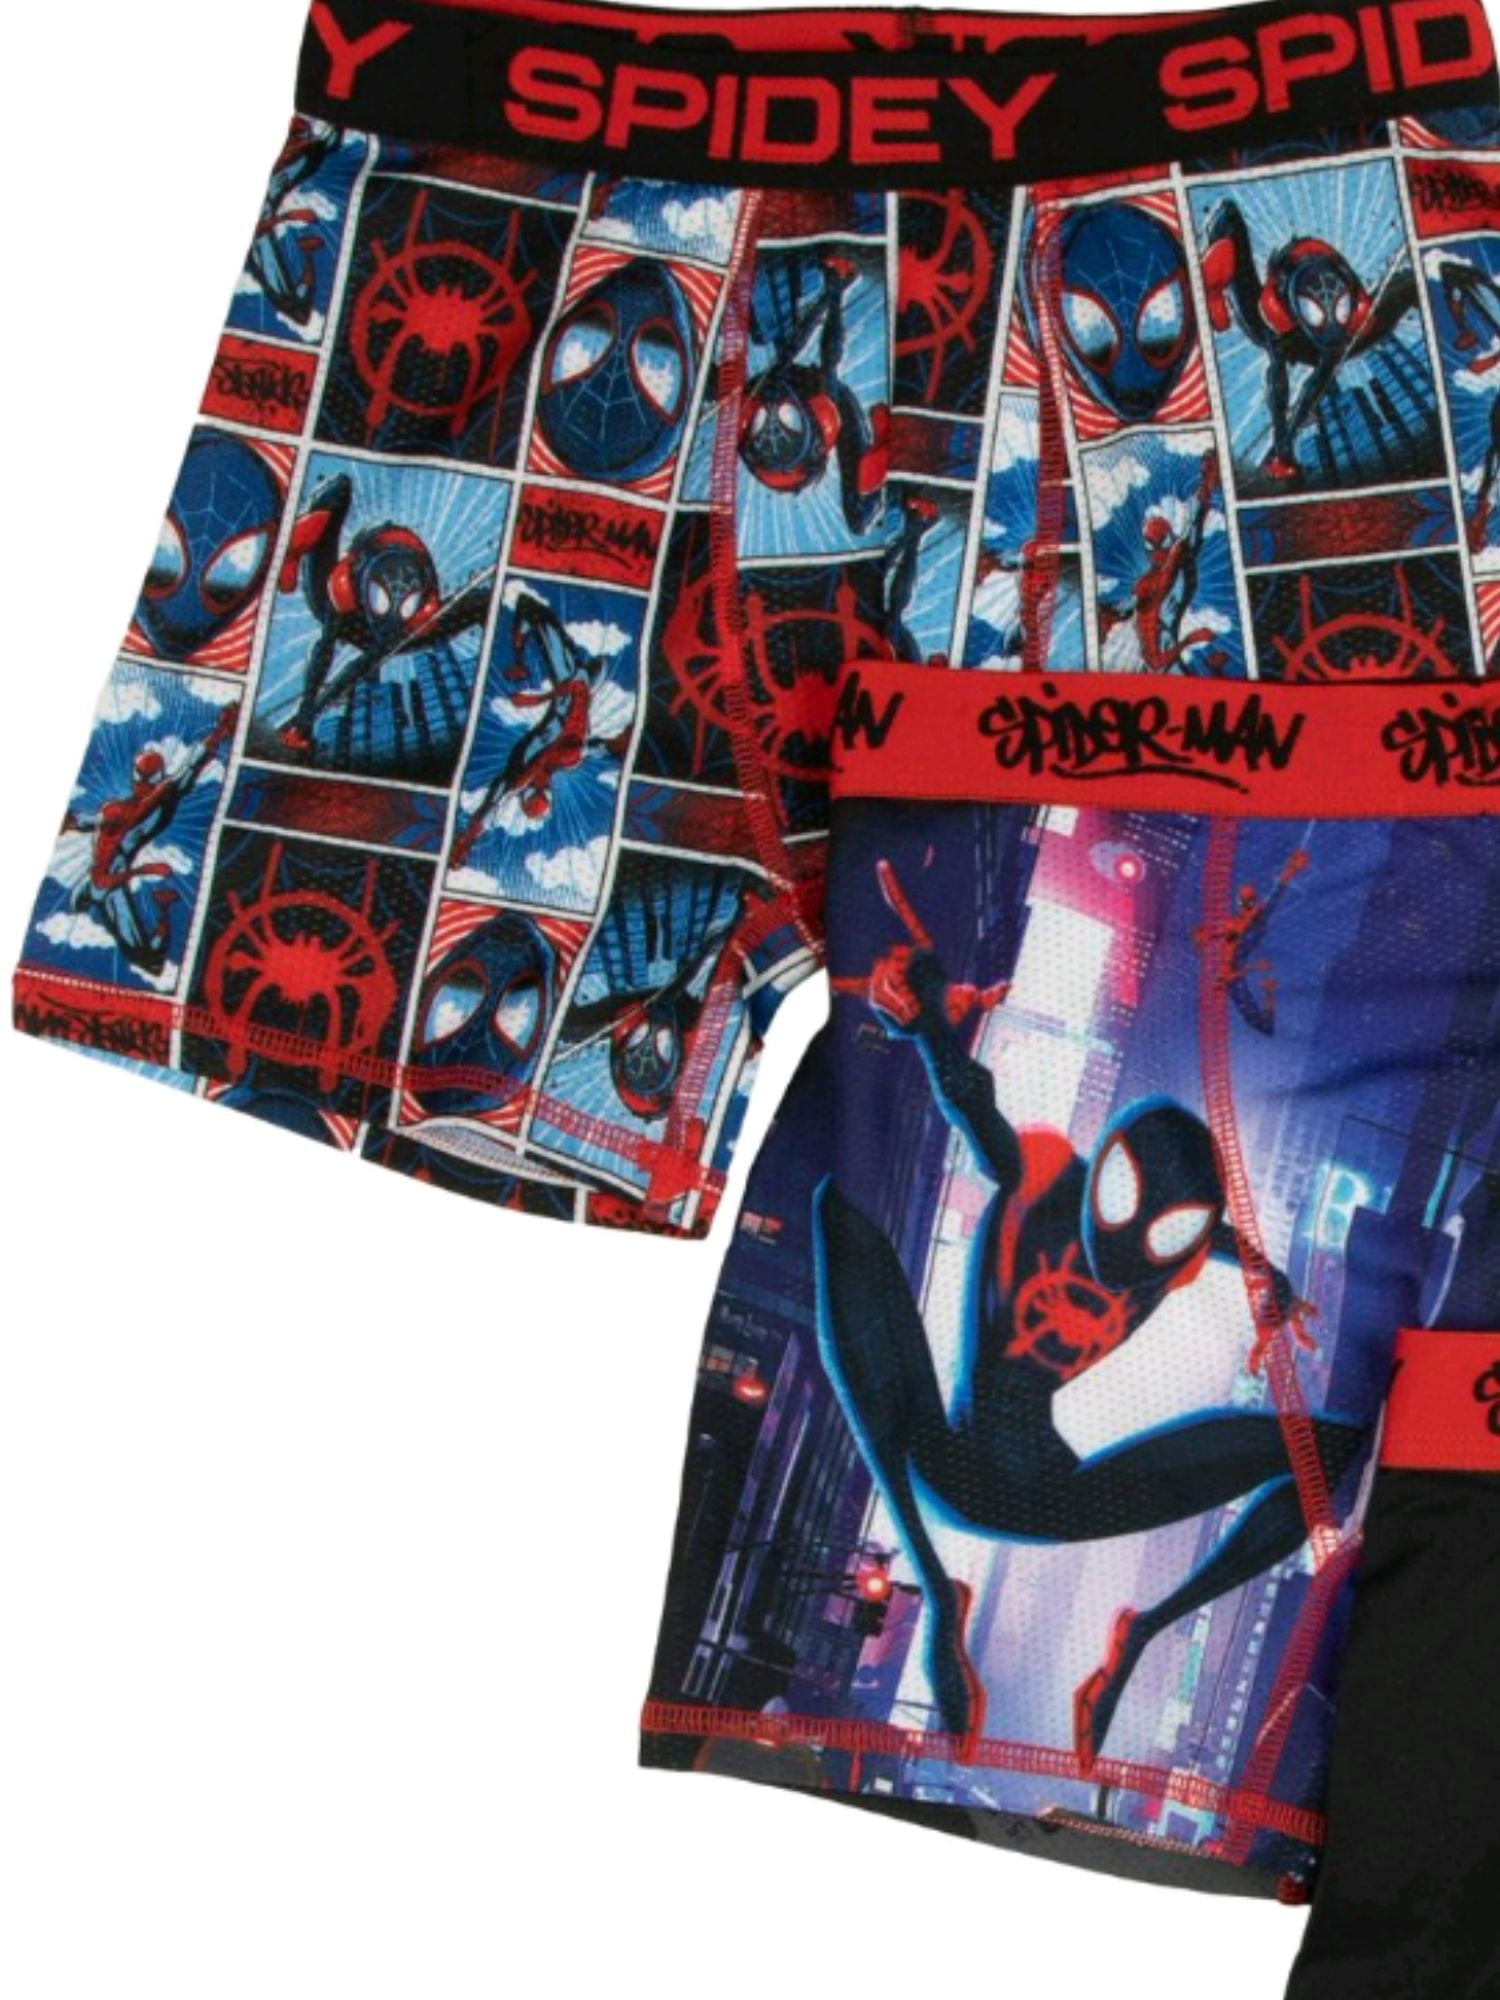 140 cms Ultimate Spiderman Boxer Shorts for Boys 9-10